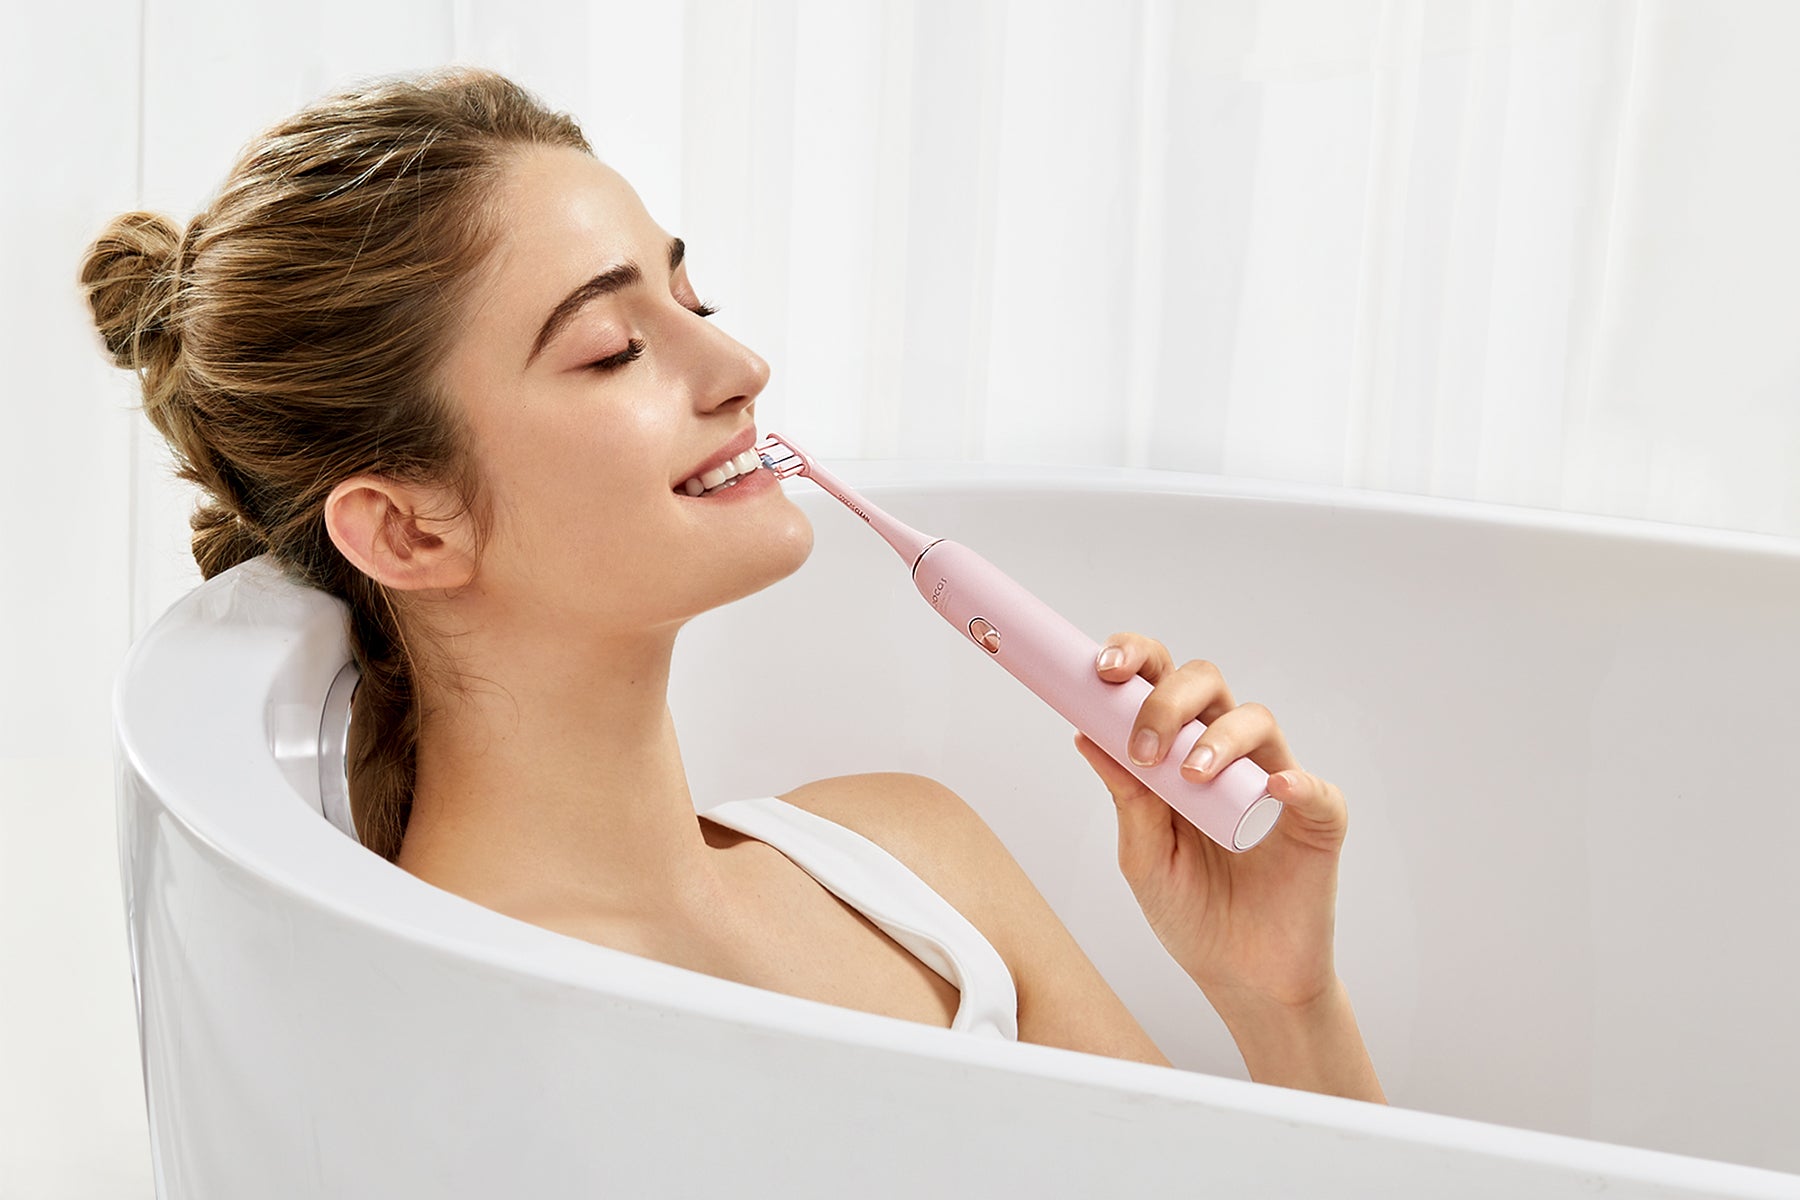 How to properly use an electric toothbrush?